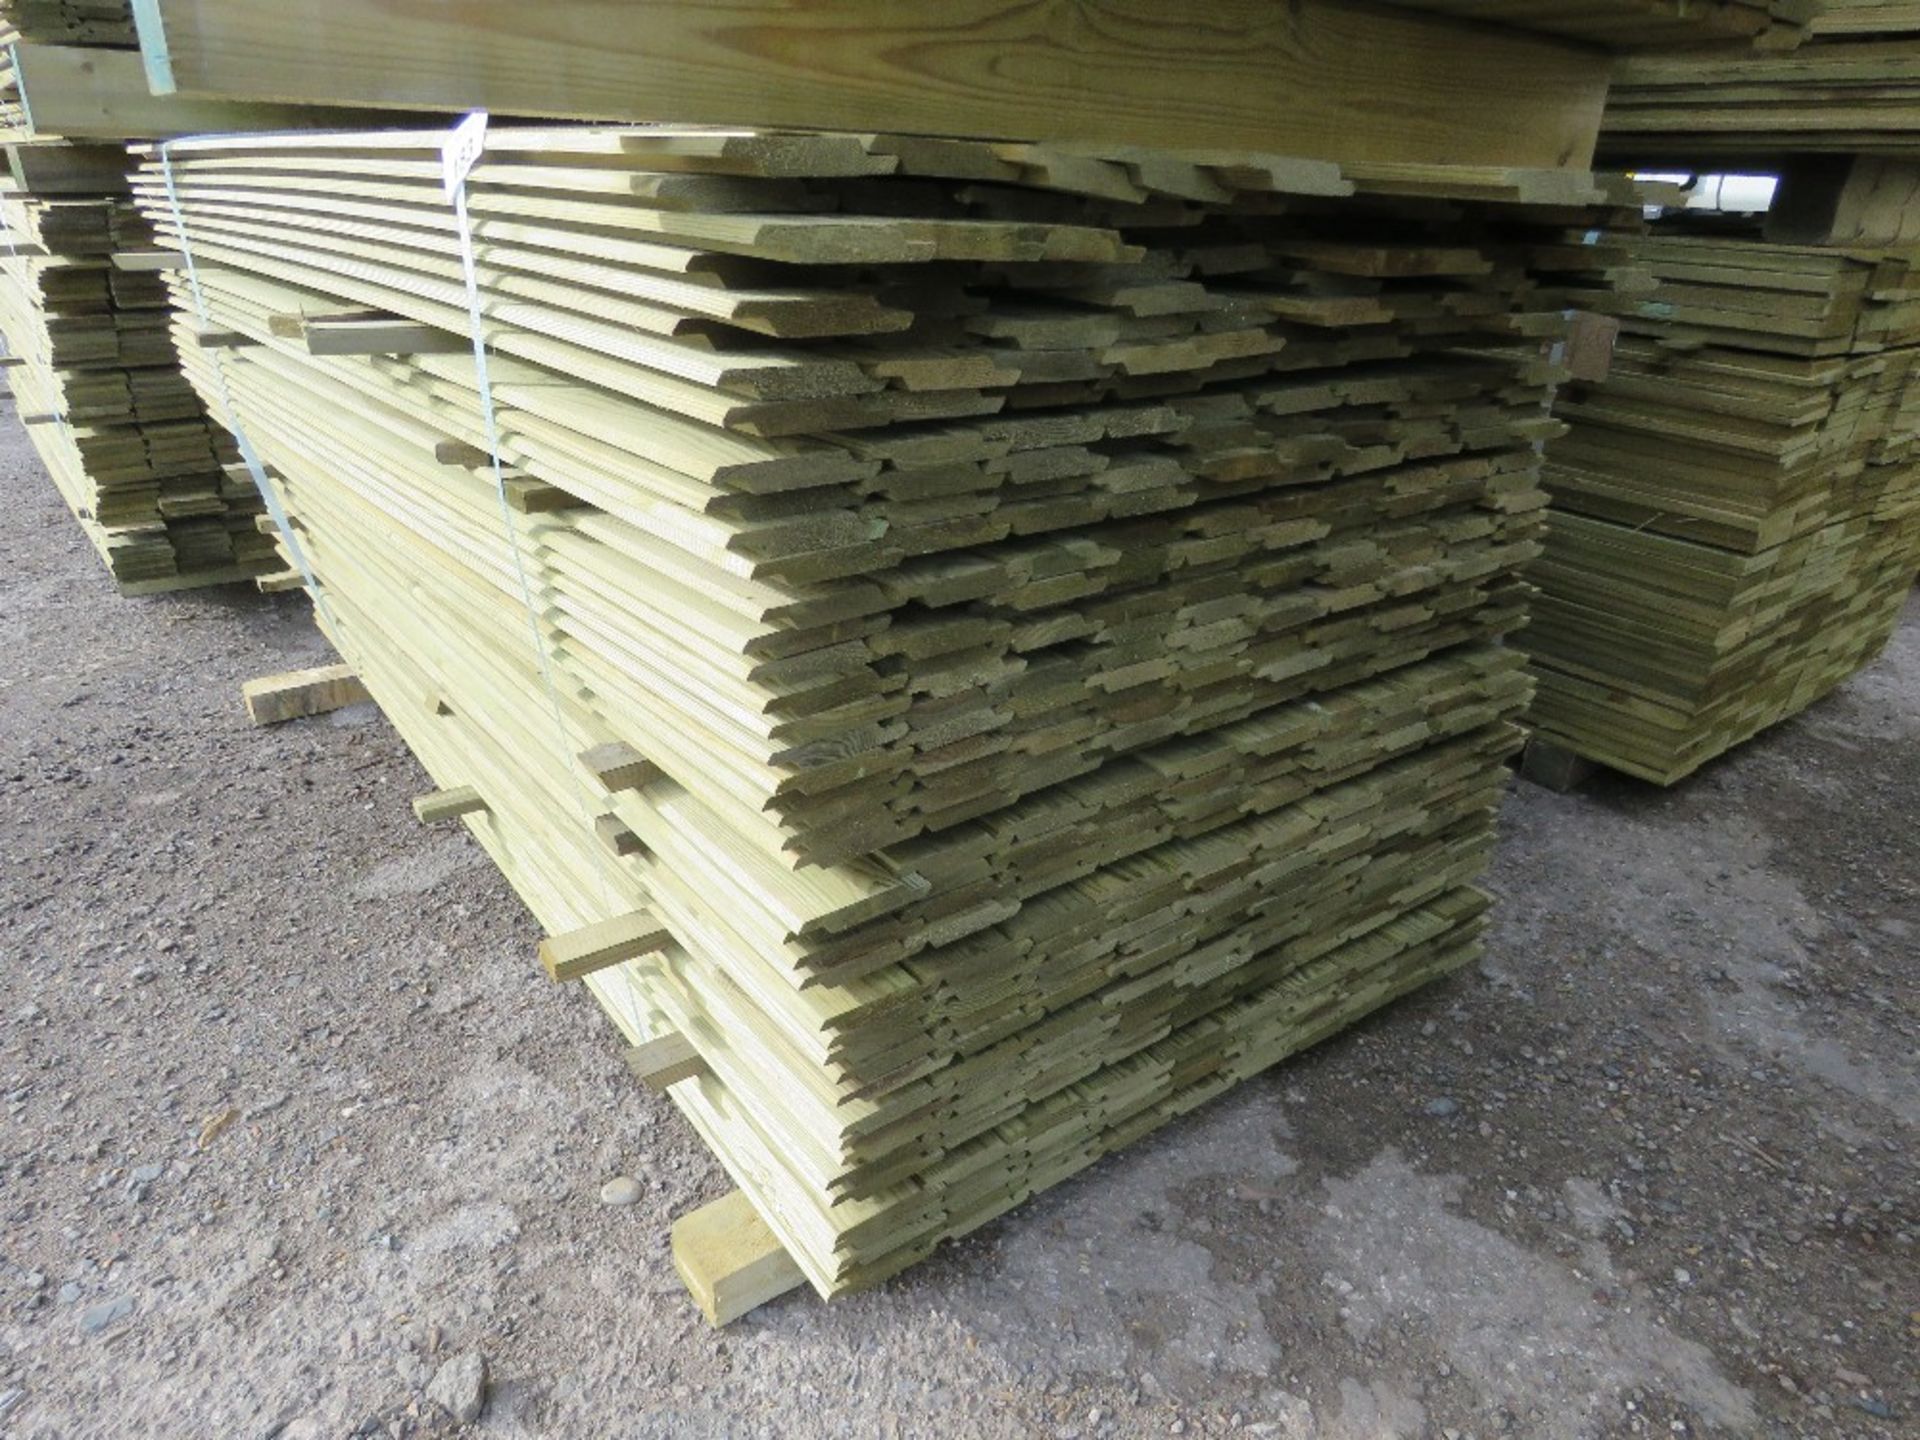 LARGE PACK OF PRESSURE TREATED SHIPLAP TYPE TIMBER CLADDING BOARDS. 1.73-1.93M LENGTH X 100MM WIDTH